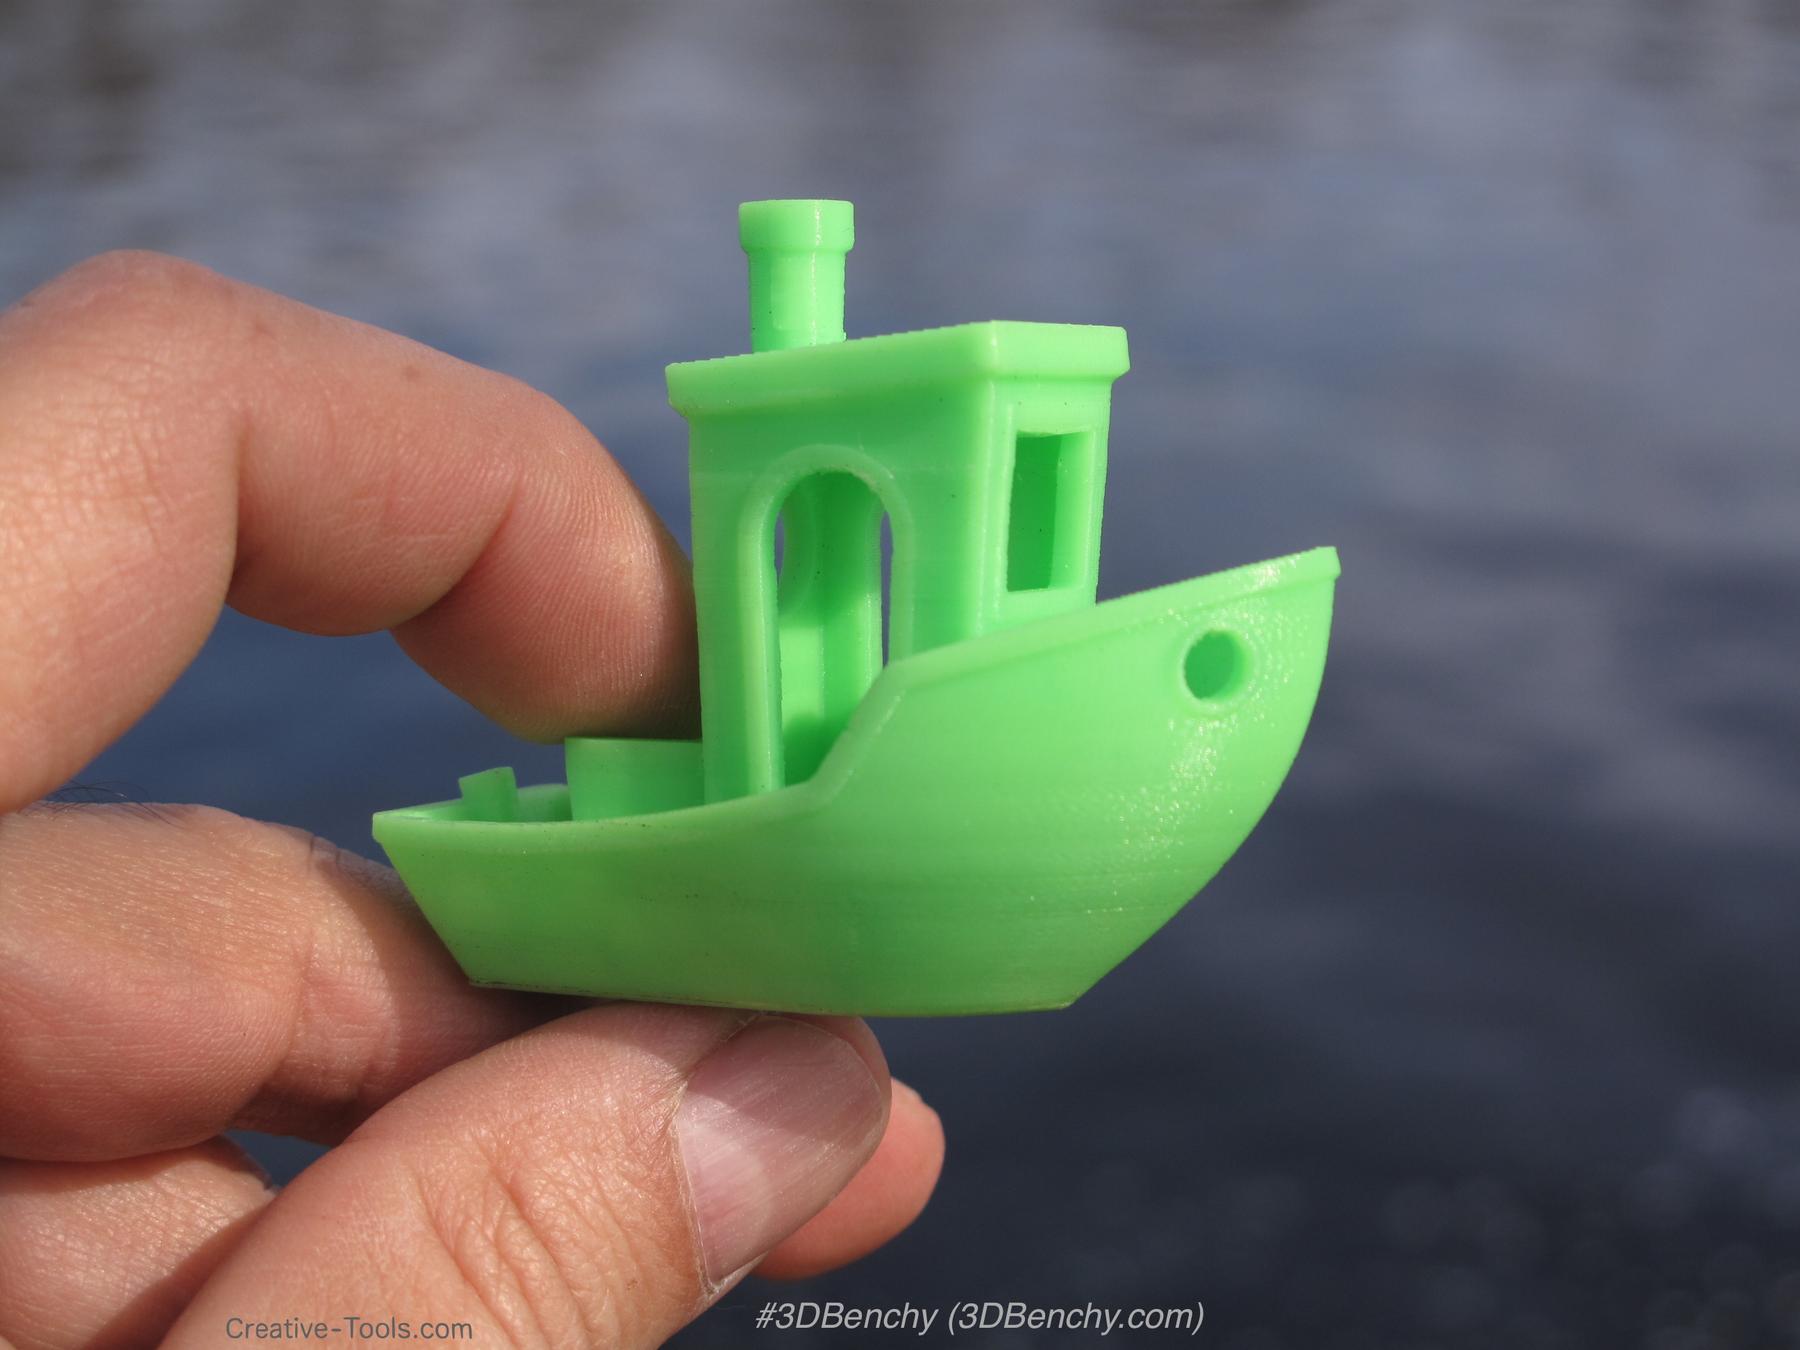 3D-printed 3DBenchy by Creative Tools - a green boat toy